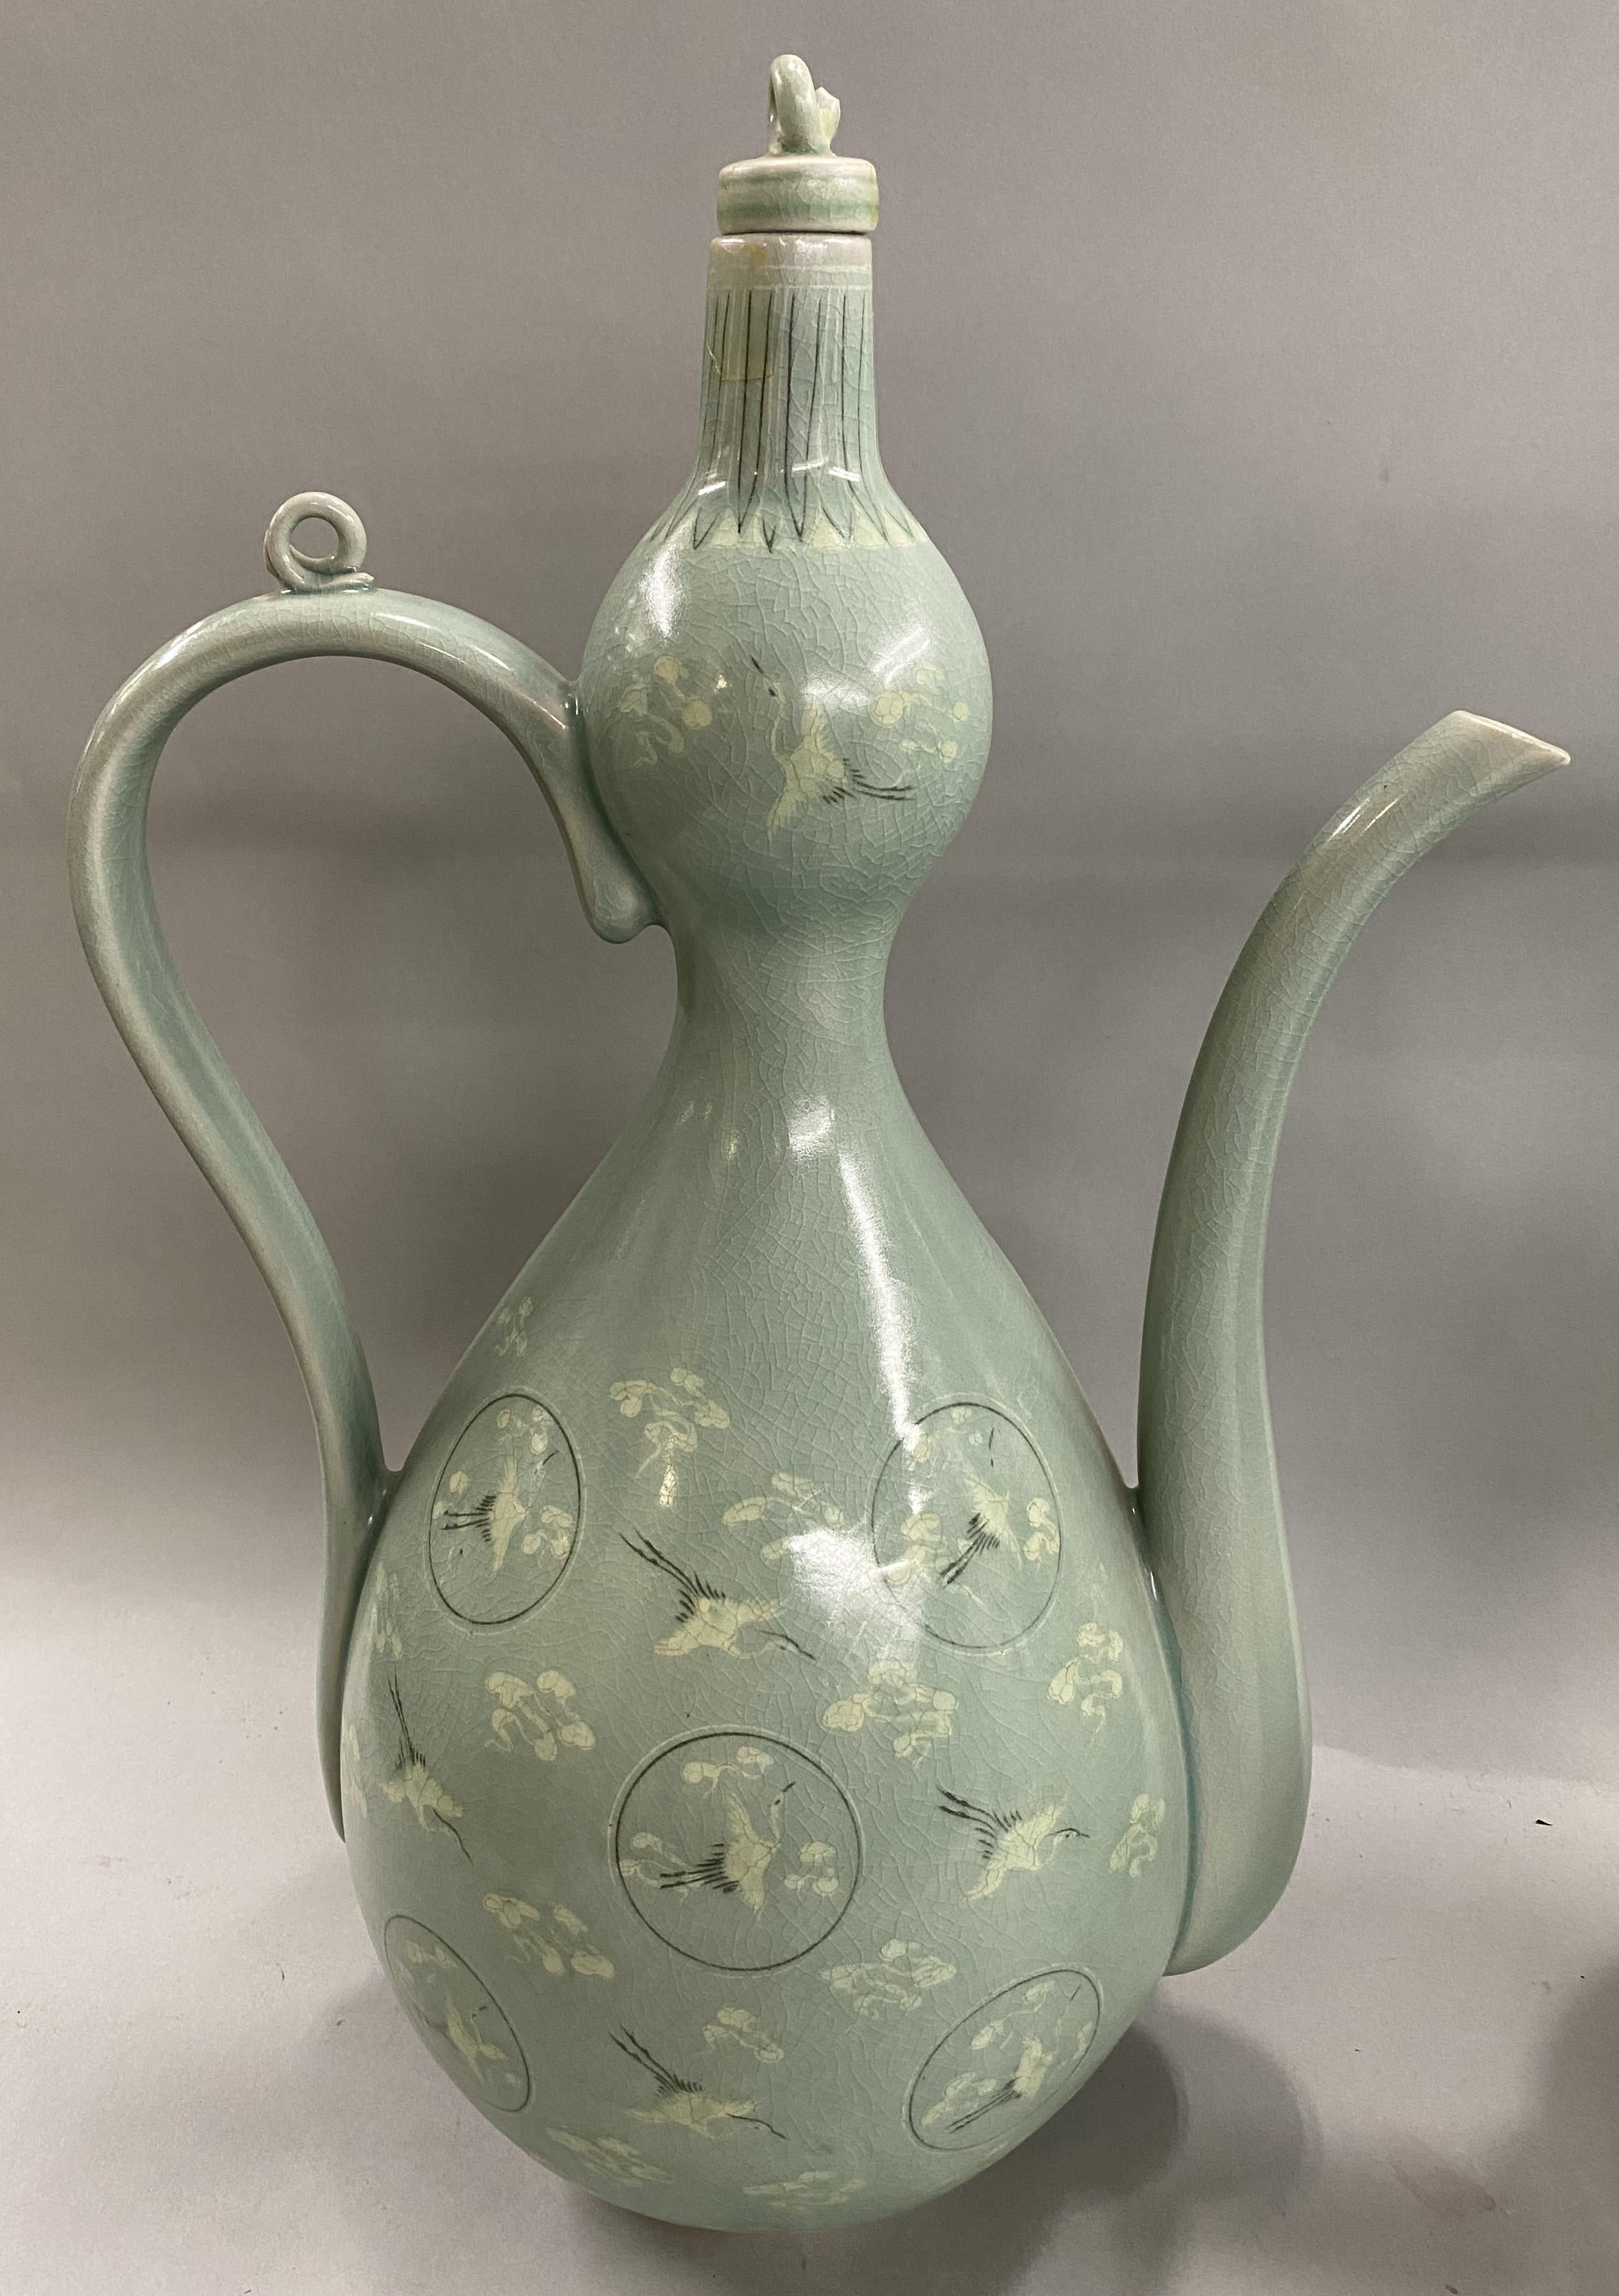 A fabulous fine pair of Korean green stork decorated celadon ewers with finial stoppers and delicate pour spouts, probably dating to the early to mid 20th century, in very good condition, with minor restorations and glaze imperfections, as well as